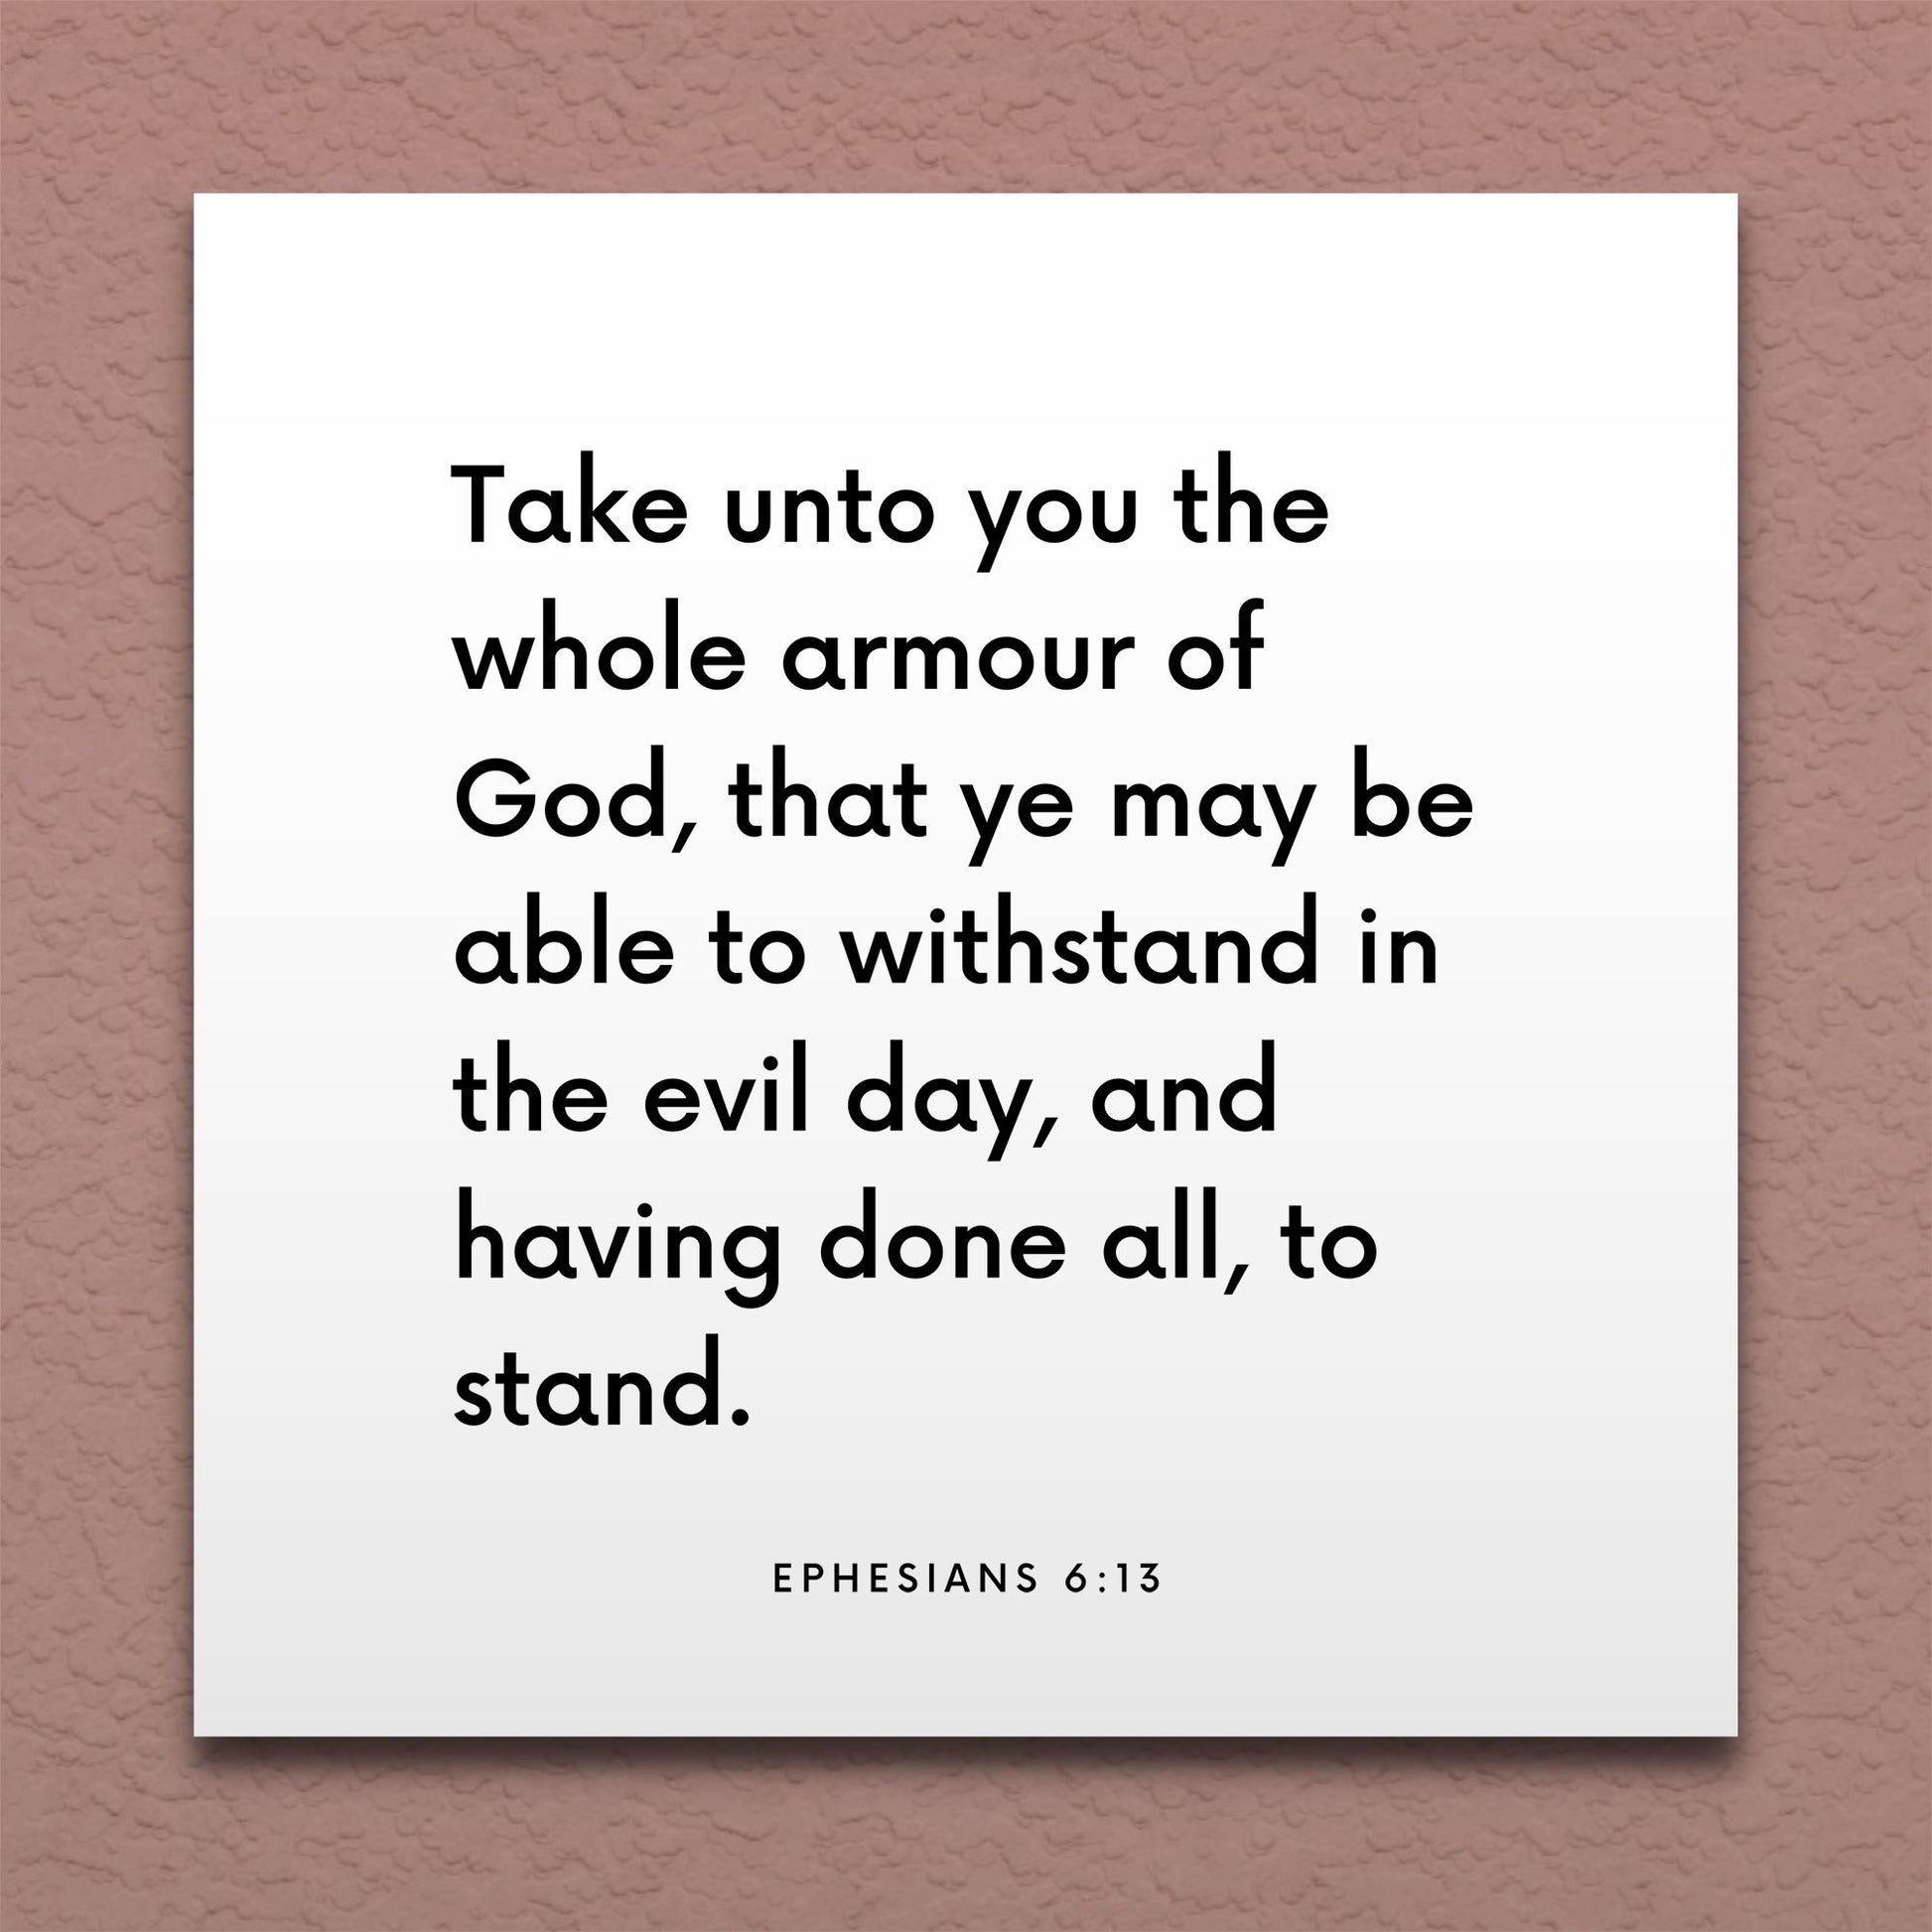 Wall-mounted scripture tile for Ephesians 6:13 - "Take unto you the whole armour of God"